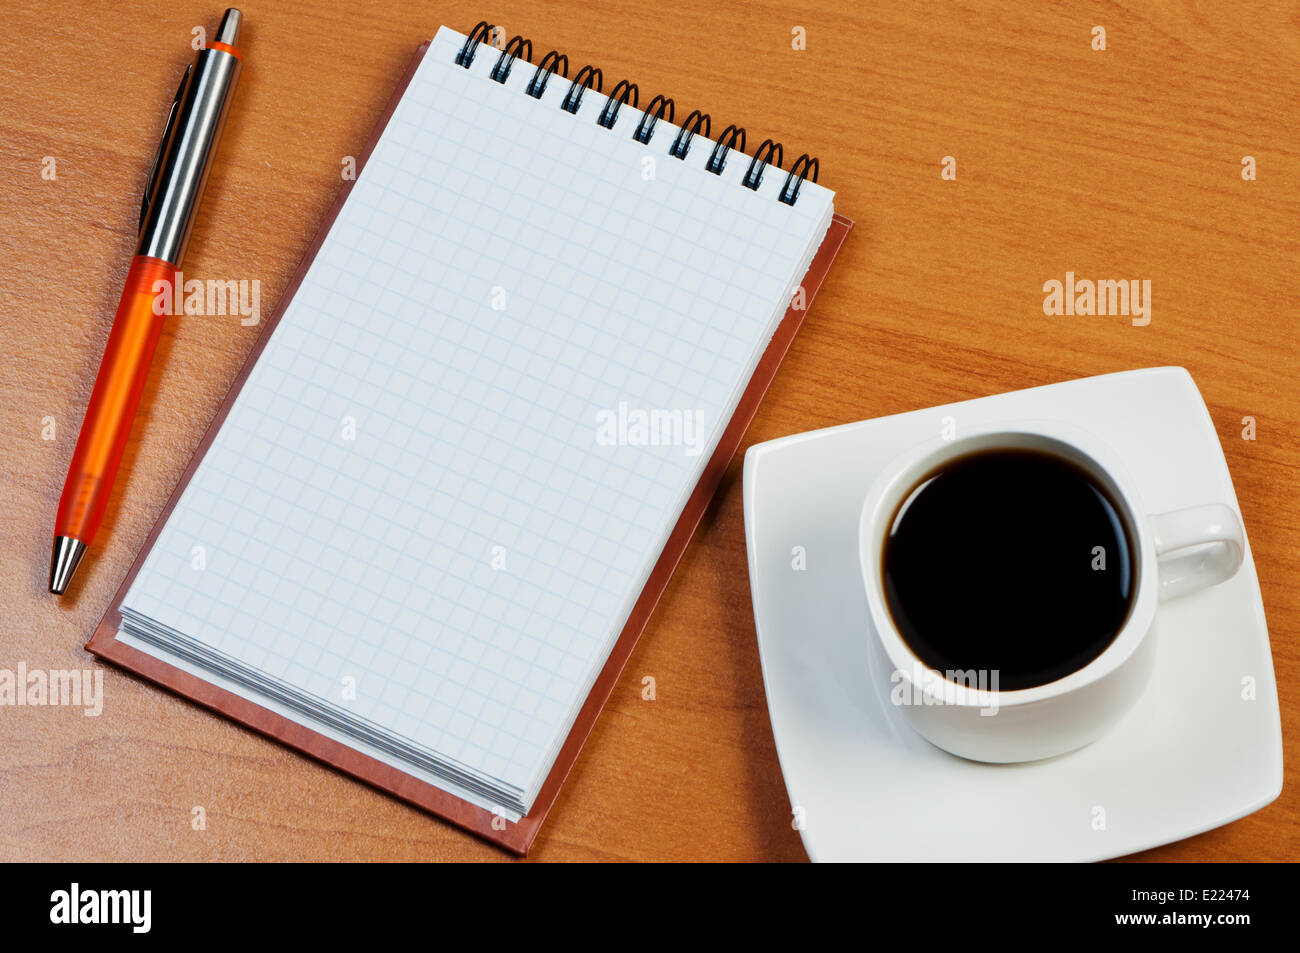 Pen, notebook and coffee on table. Stock Photo